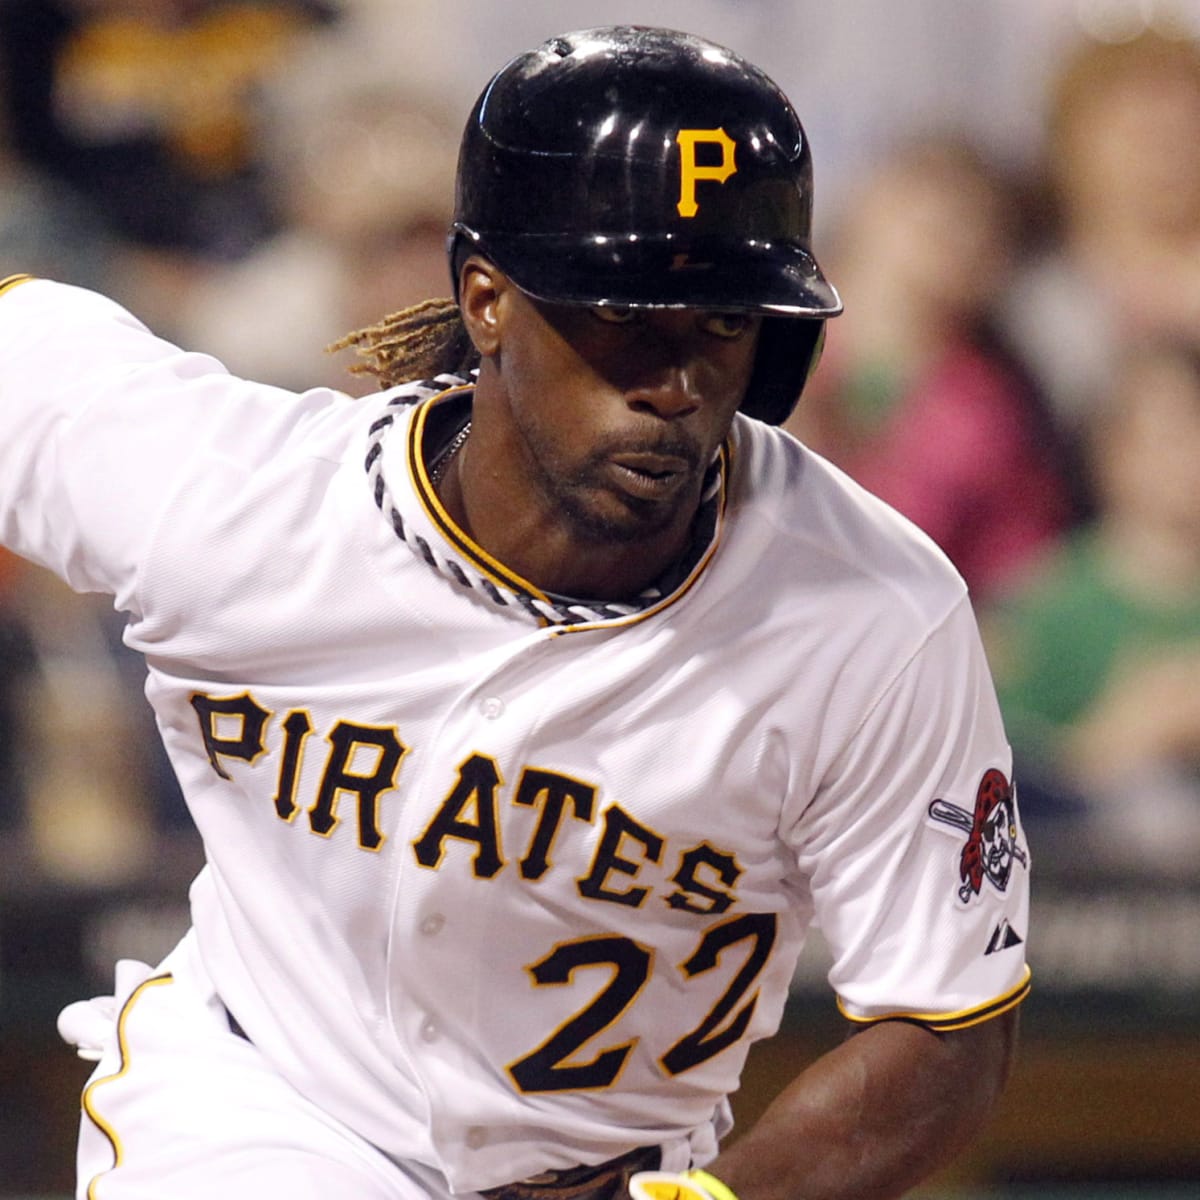 Andrew McCutchen is playing for his MLB future in 2021 - Beyond the Box  Score